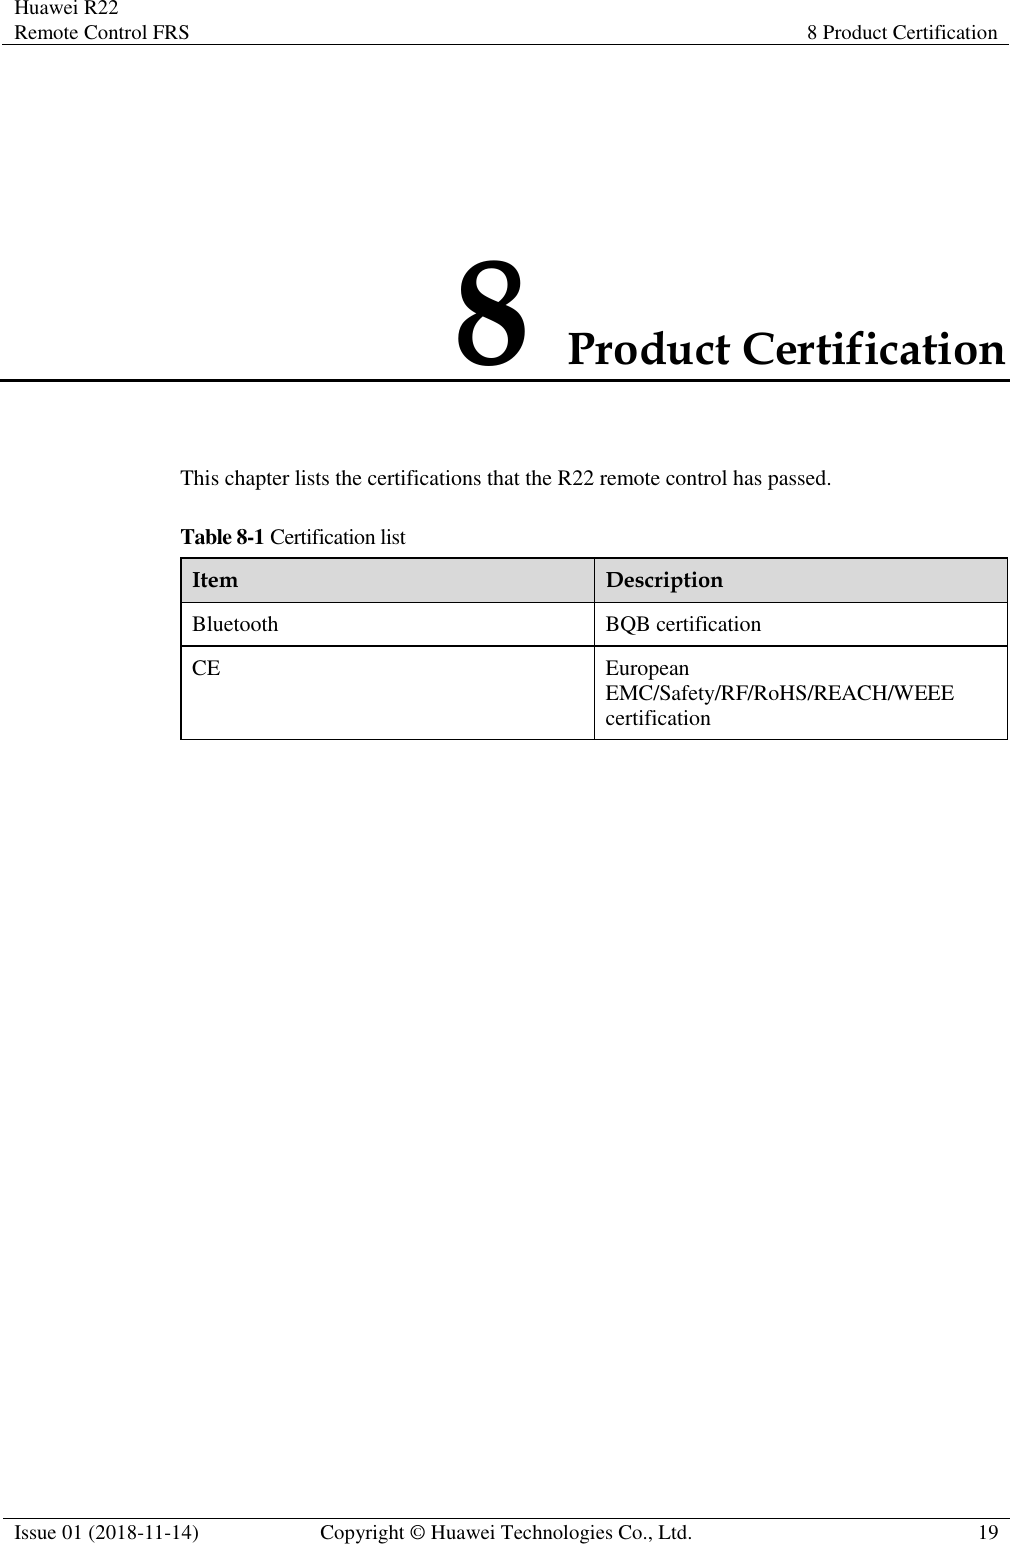 Huawei R22 Remote Control FRS 8 Product Certification  Issue 01 (2018-11-14) Copyright © Huawei Technologies Co., Ltd. 19  8 Product Certification This chapter lists the certifications that the R22 remote control has passed. Table 8-1 Certification list Item Description Bluetooth BQB certification CE European EMC/Safety/RF/RoHS/REACH/WEEE certification 